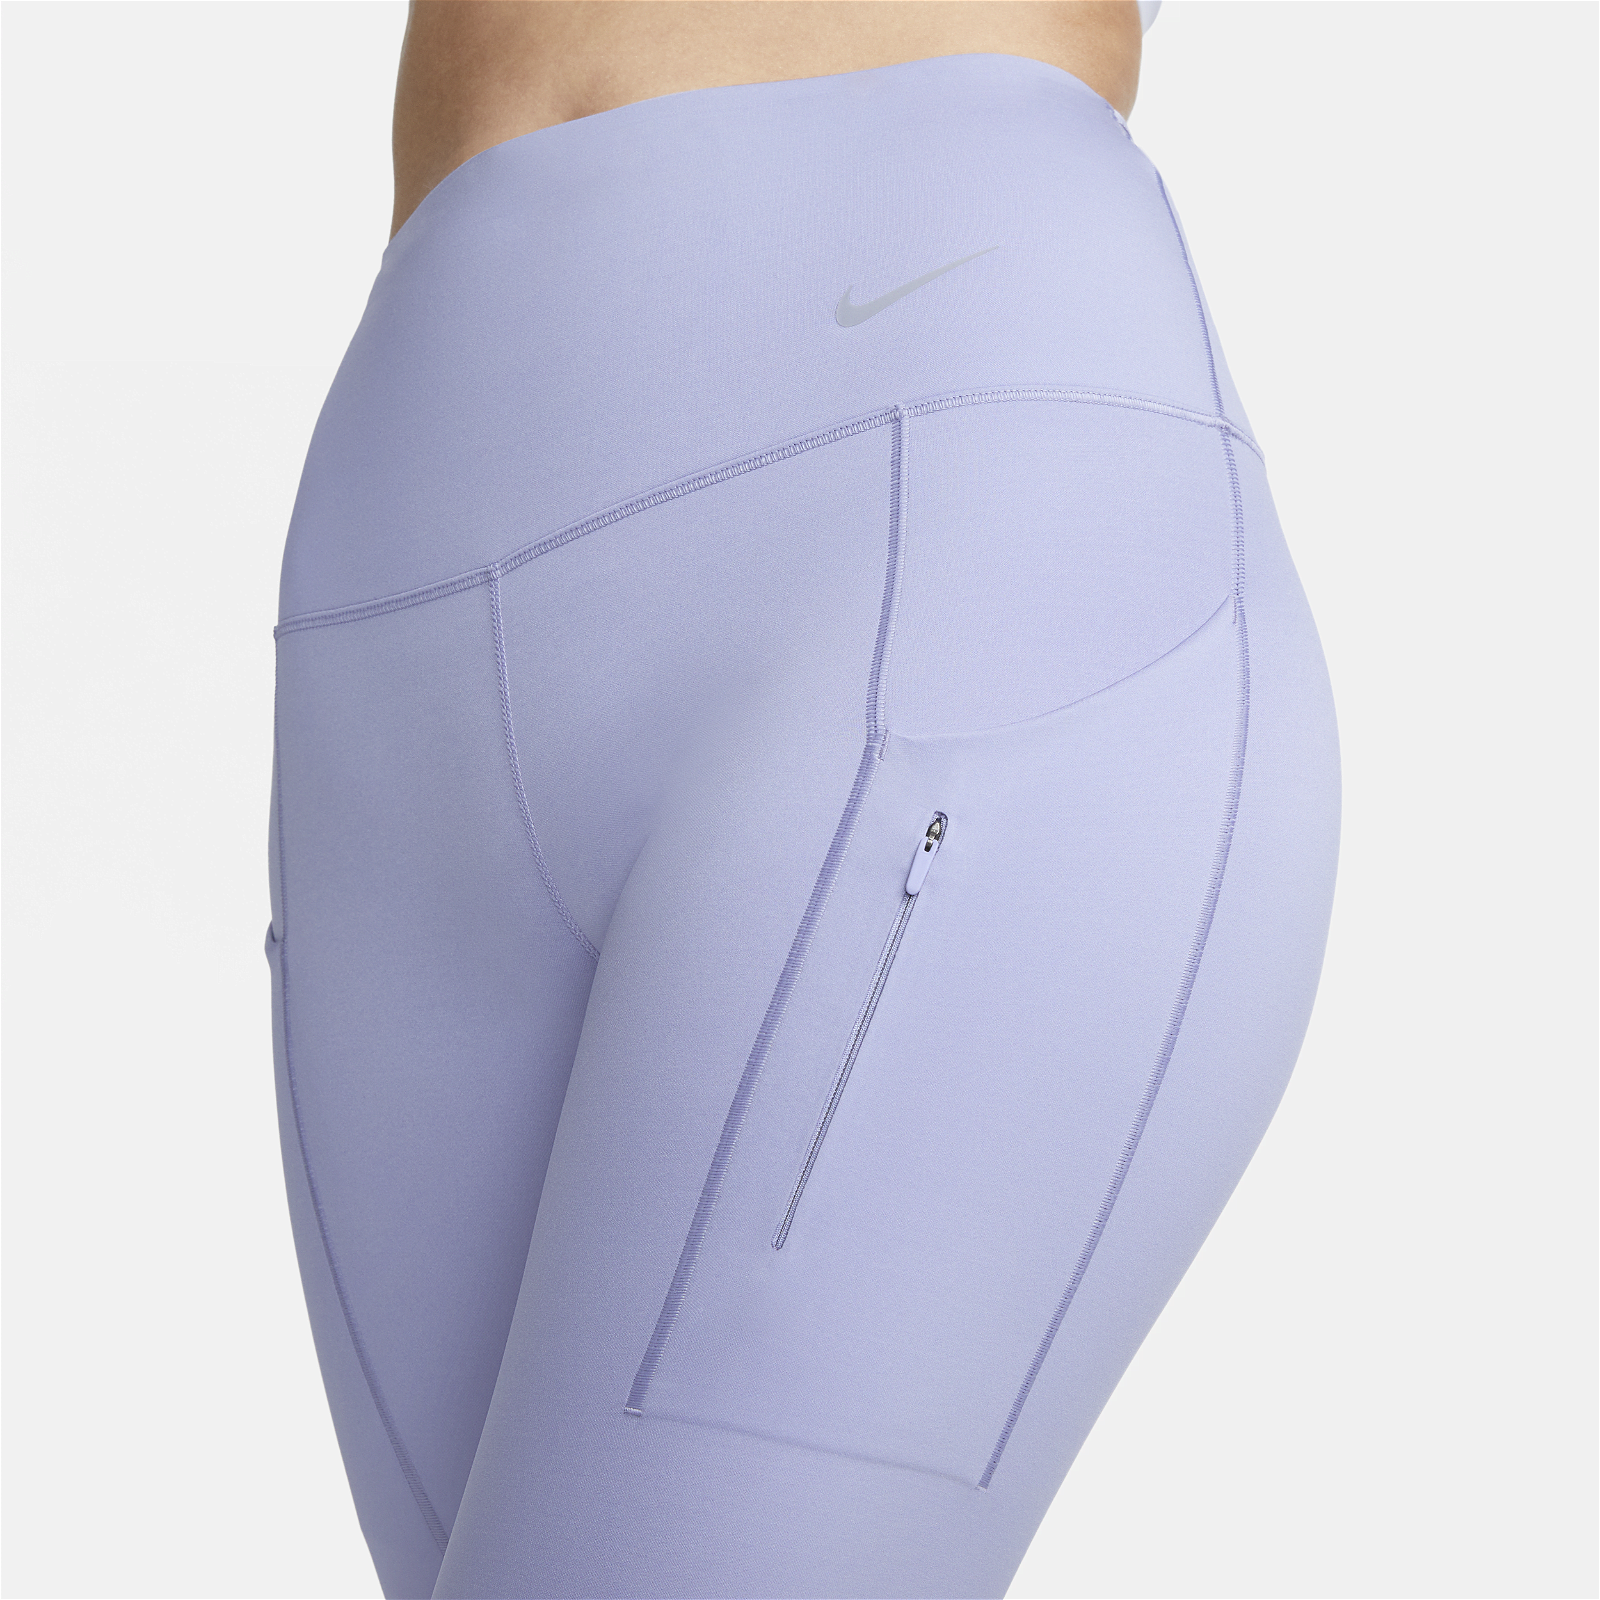 Go Firm-Support High-Waisted Full-Length Leggings with Pockets